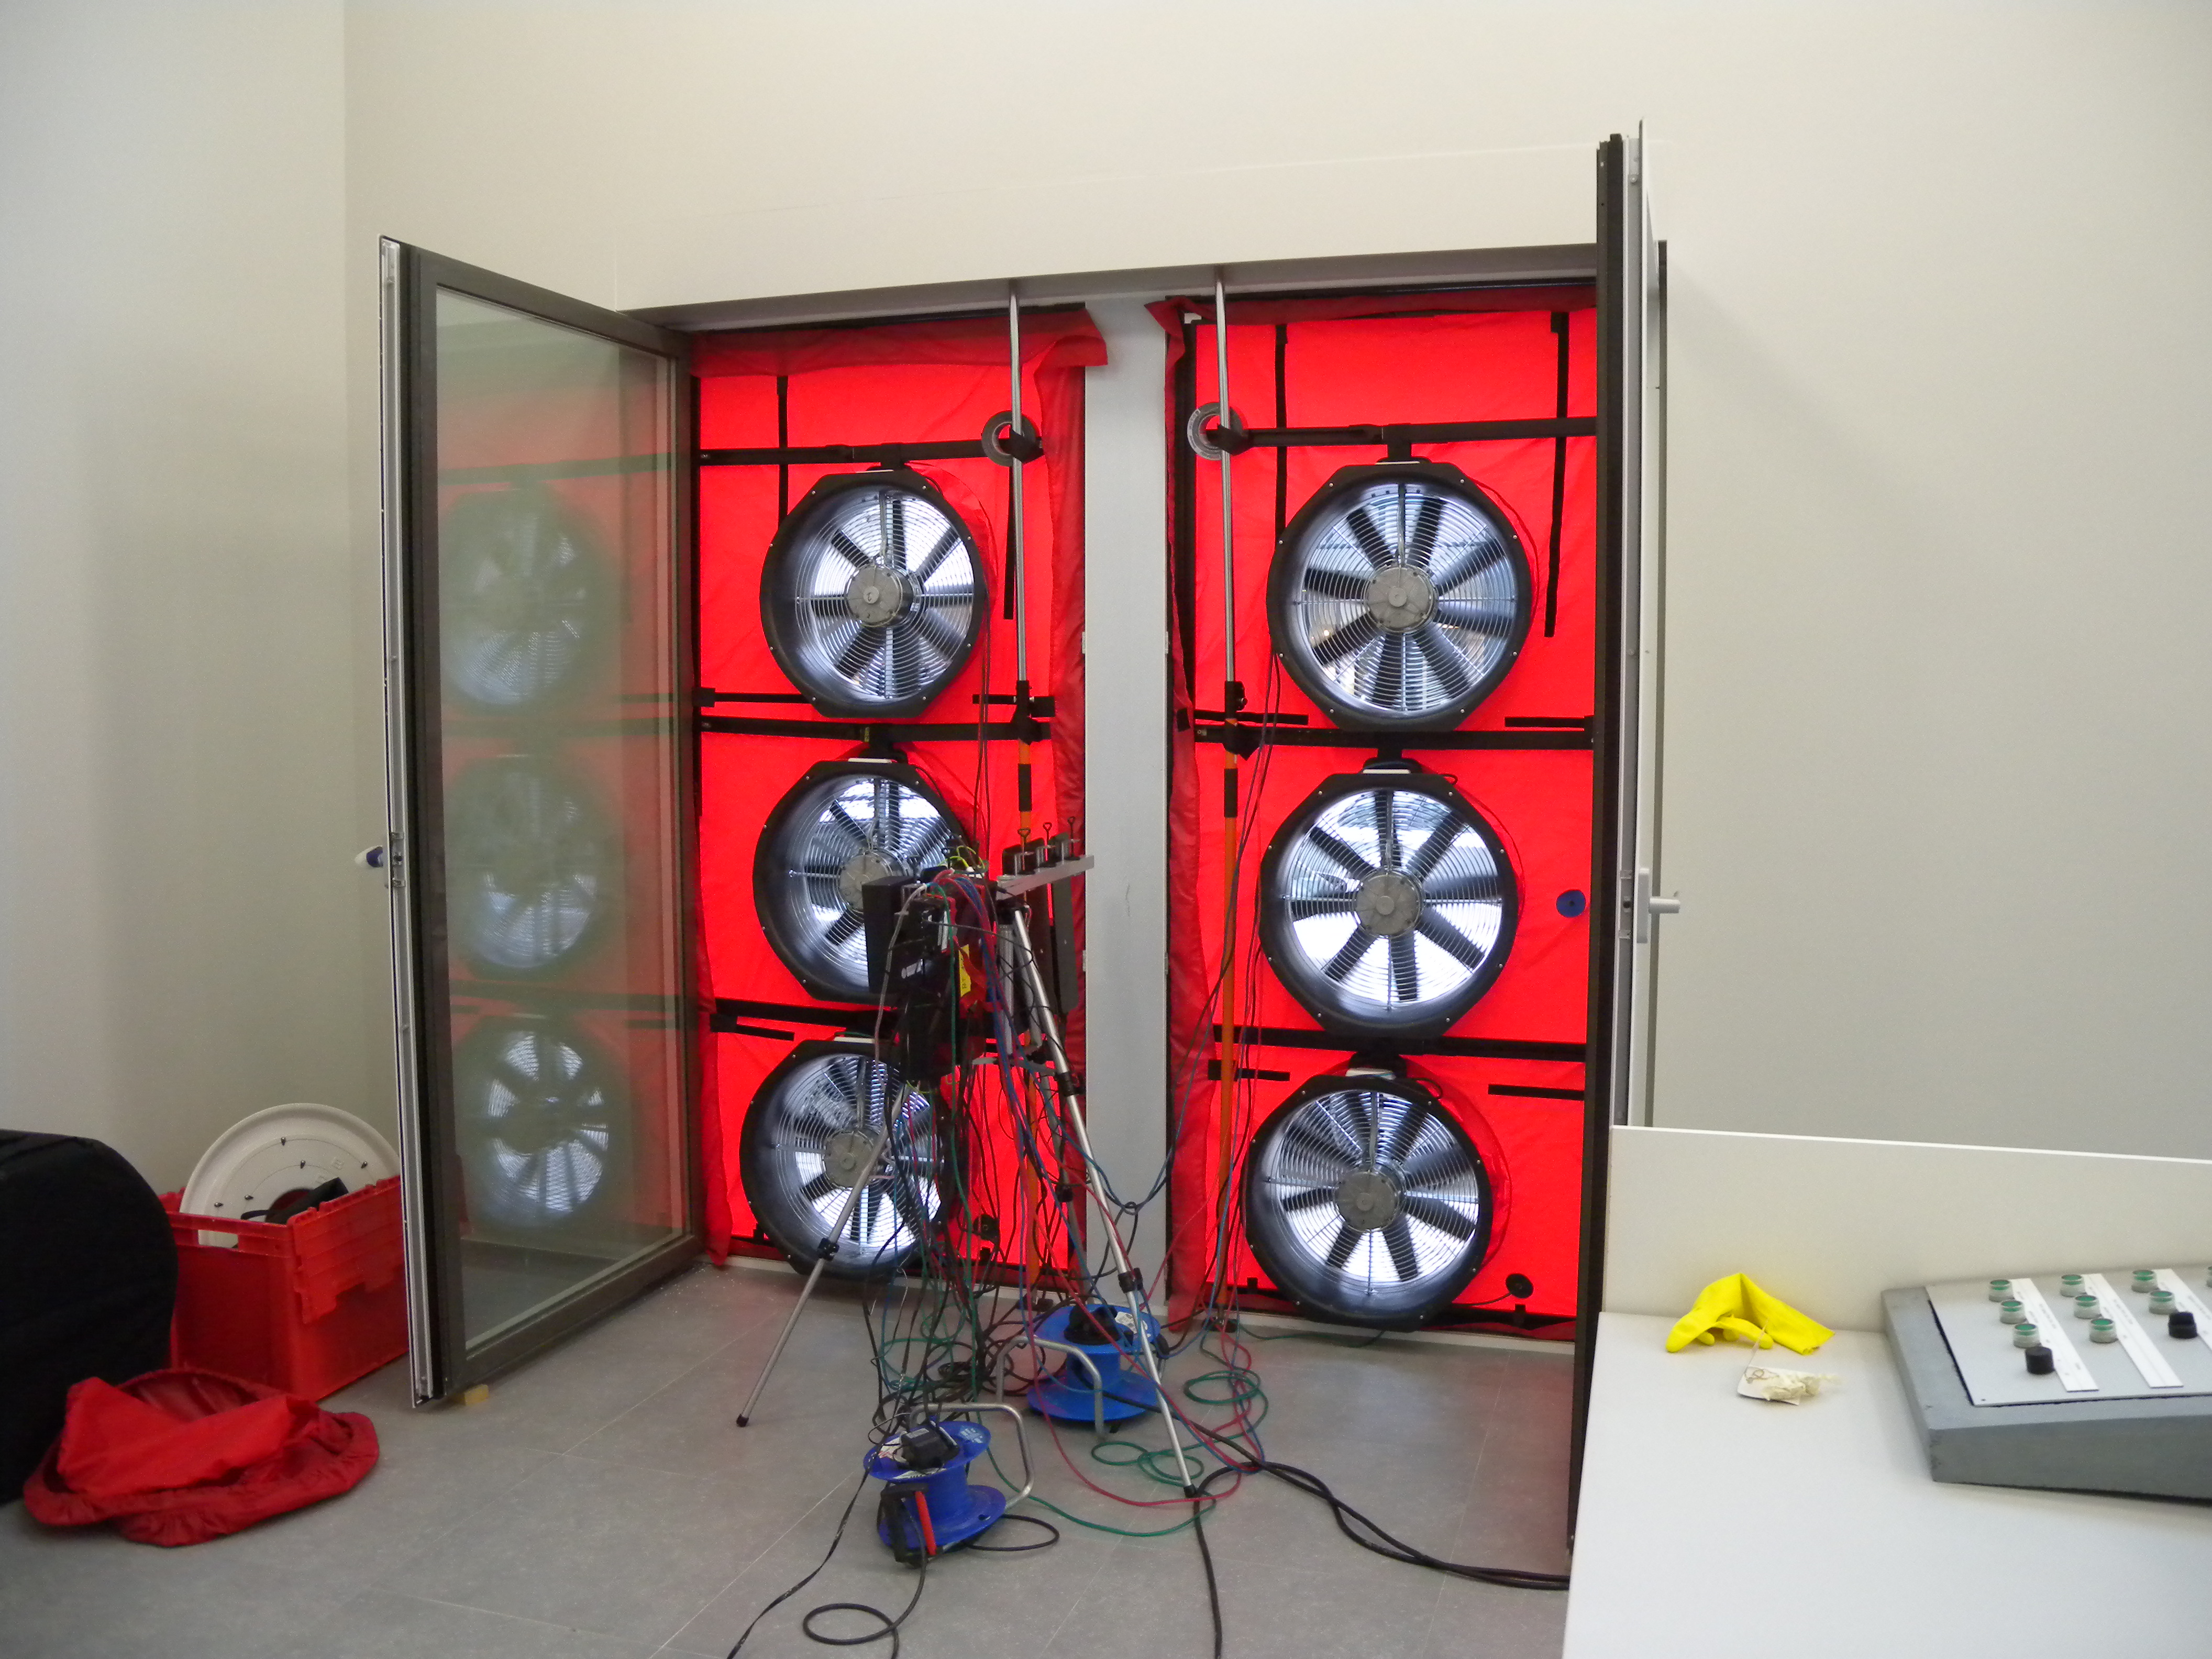 Example of a BlowerDoor test with 6 fans